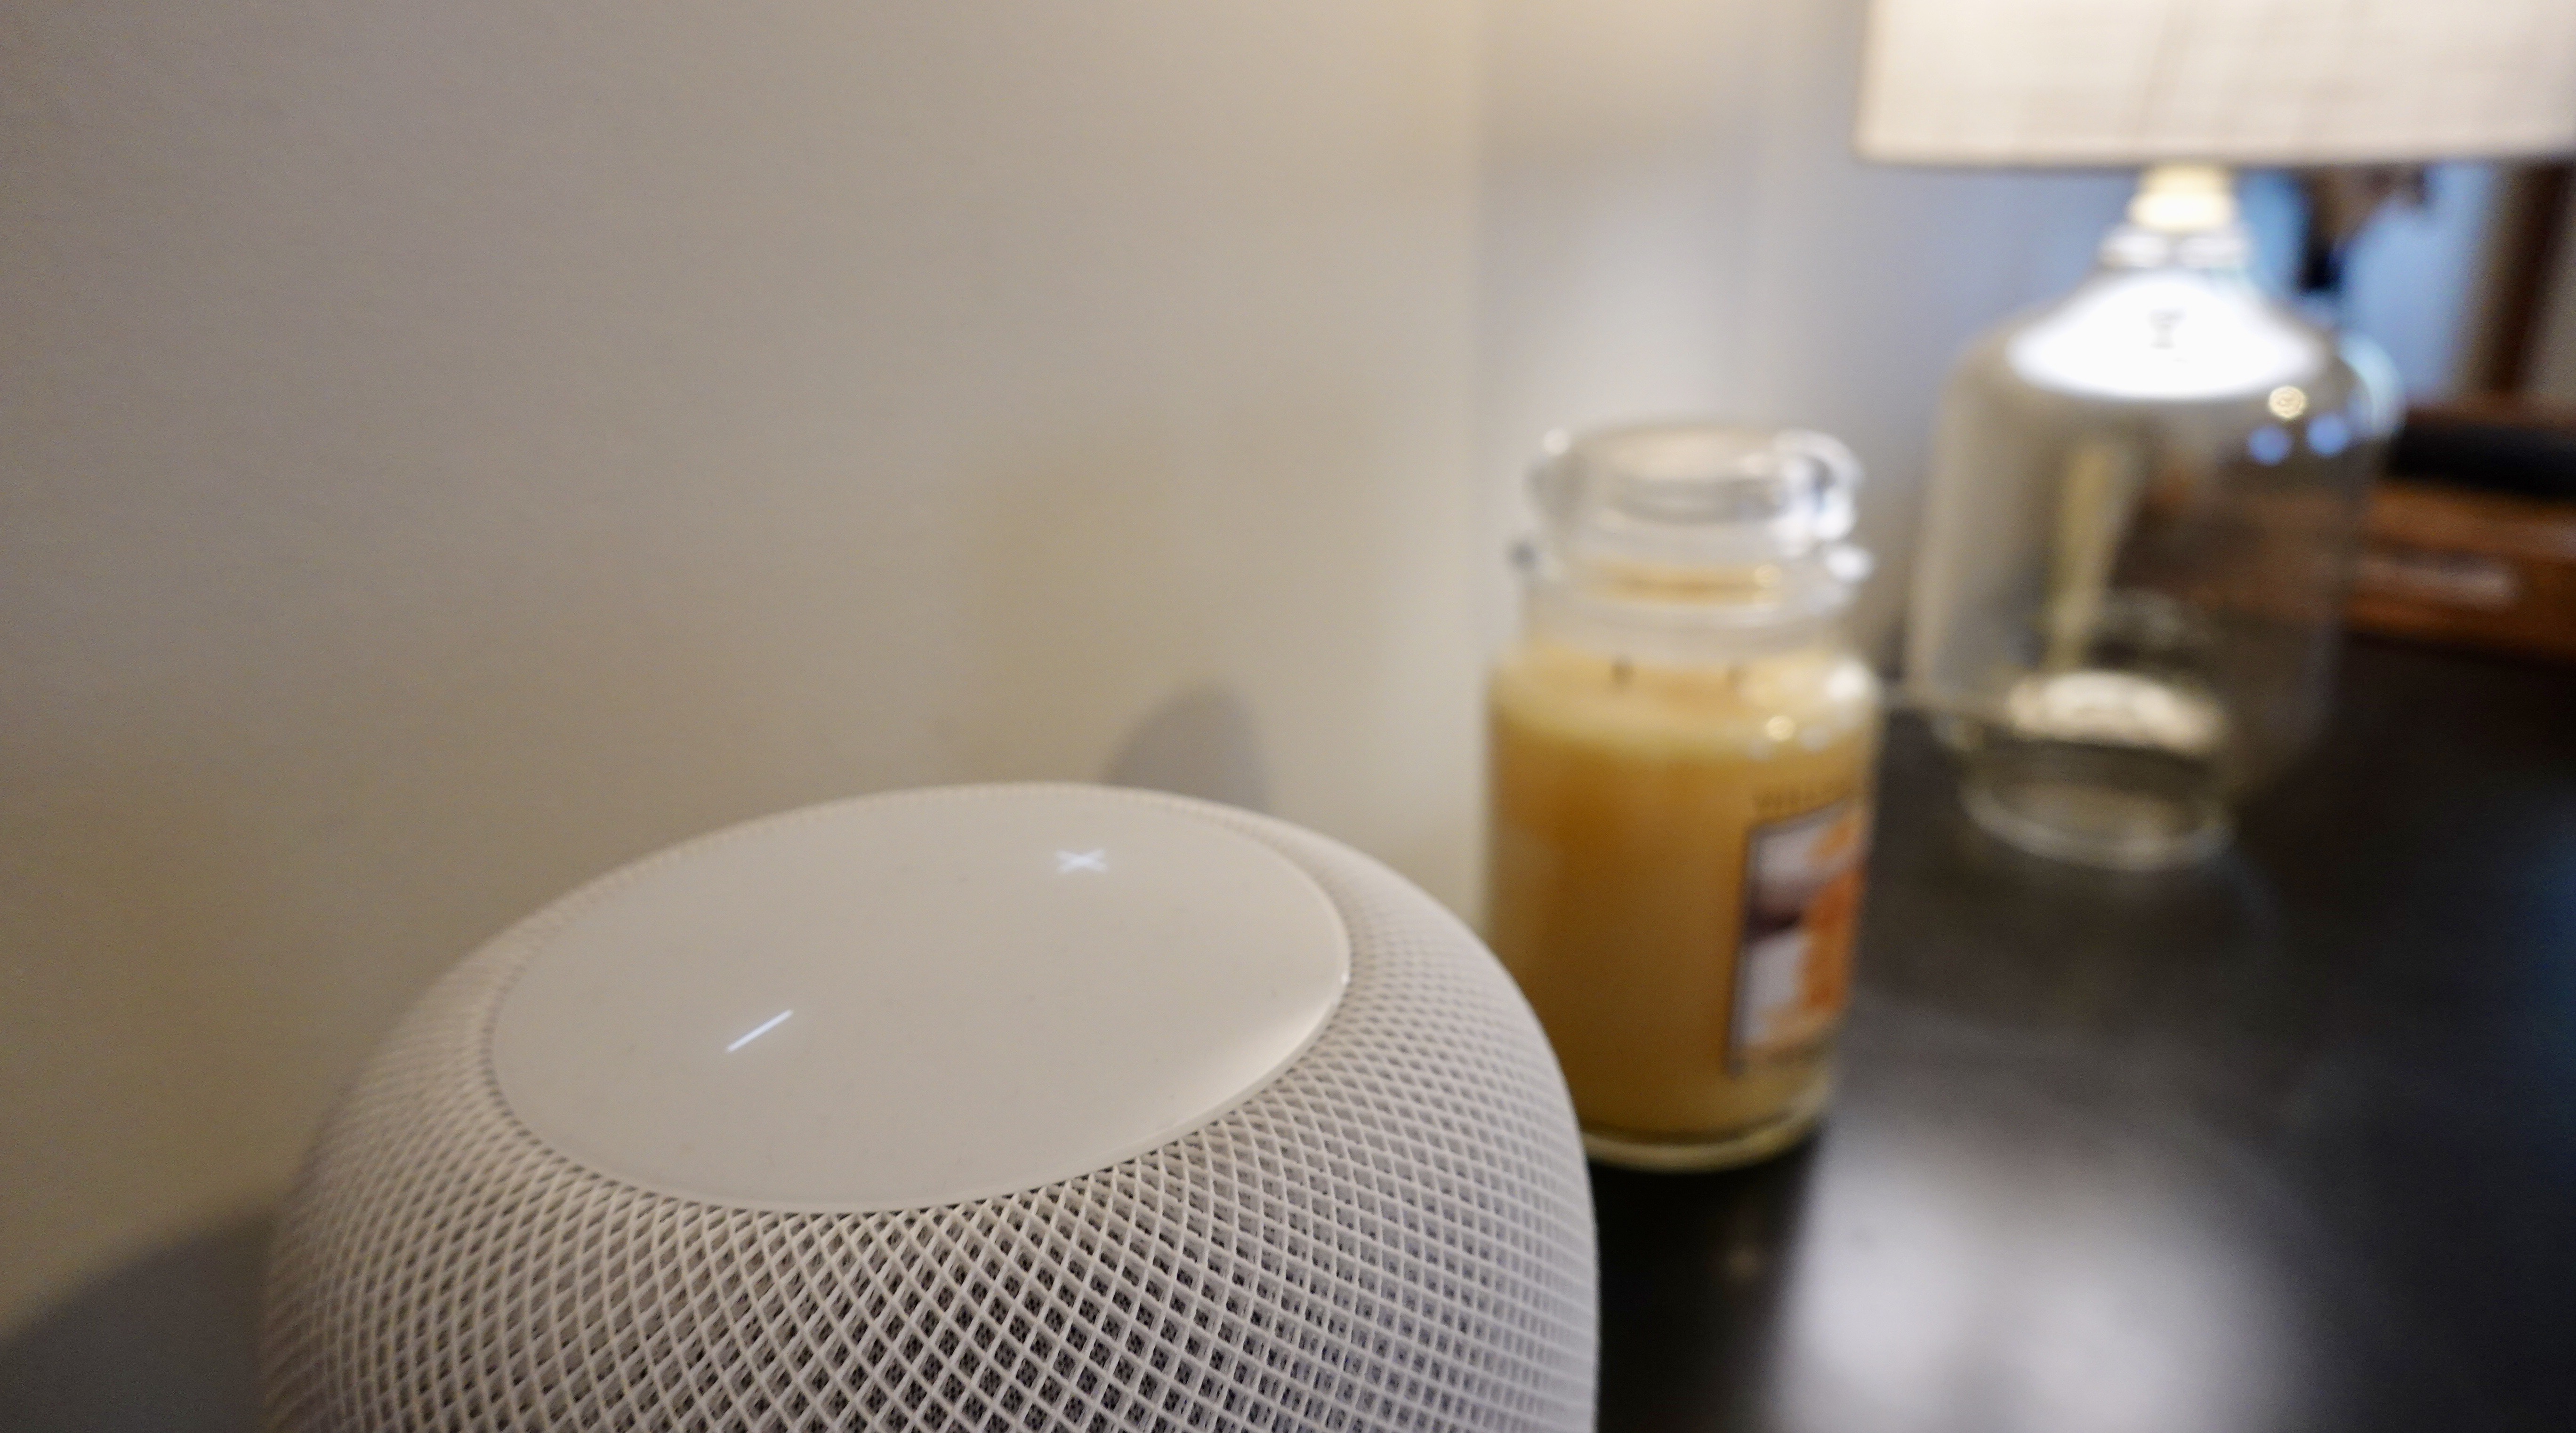 HomePod for $200? New features and holiday promotions make a competitive AirPlay 2 speaker